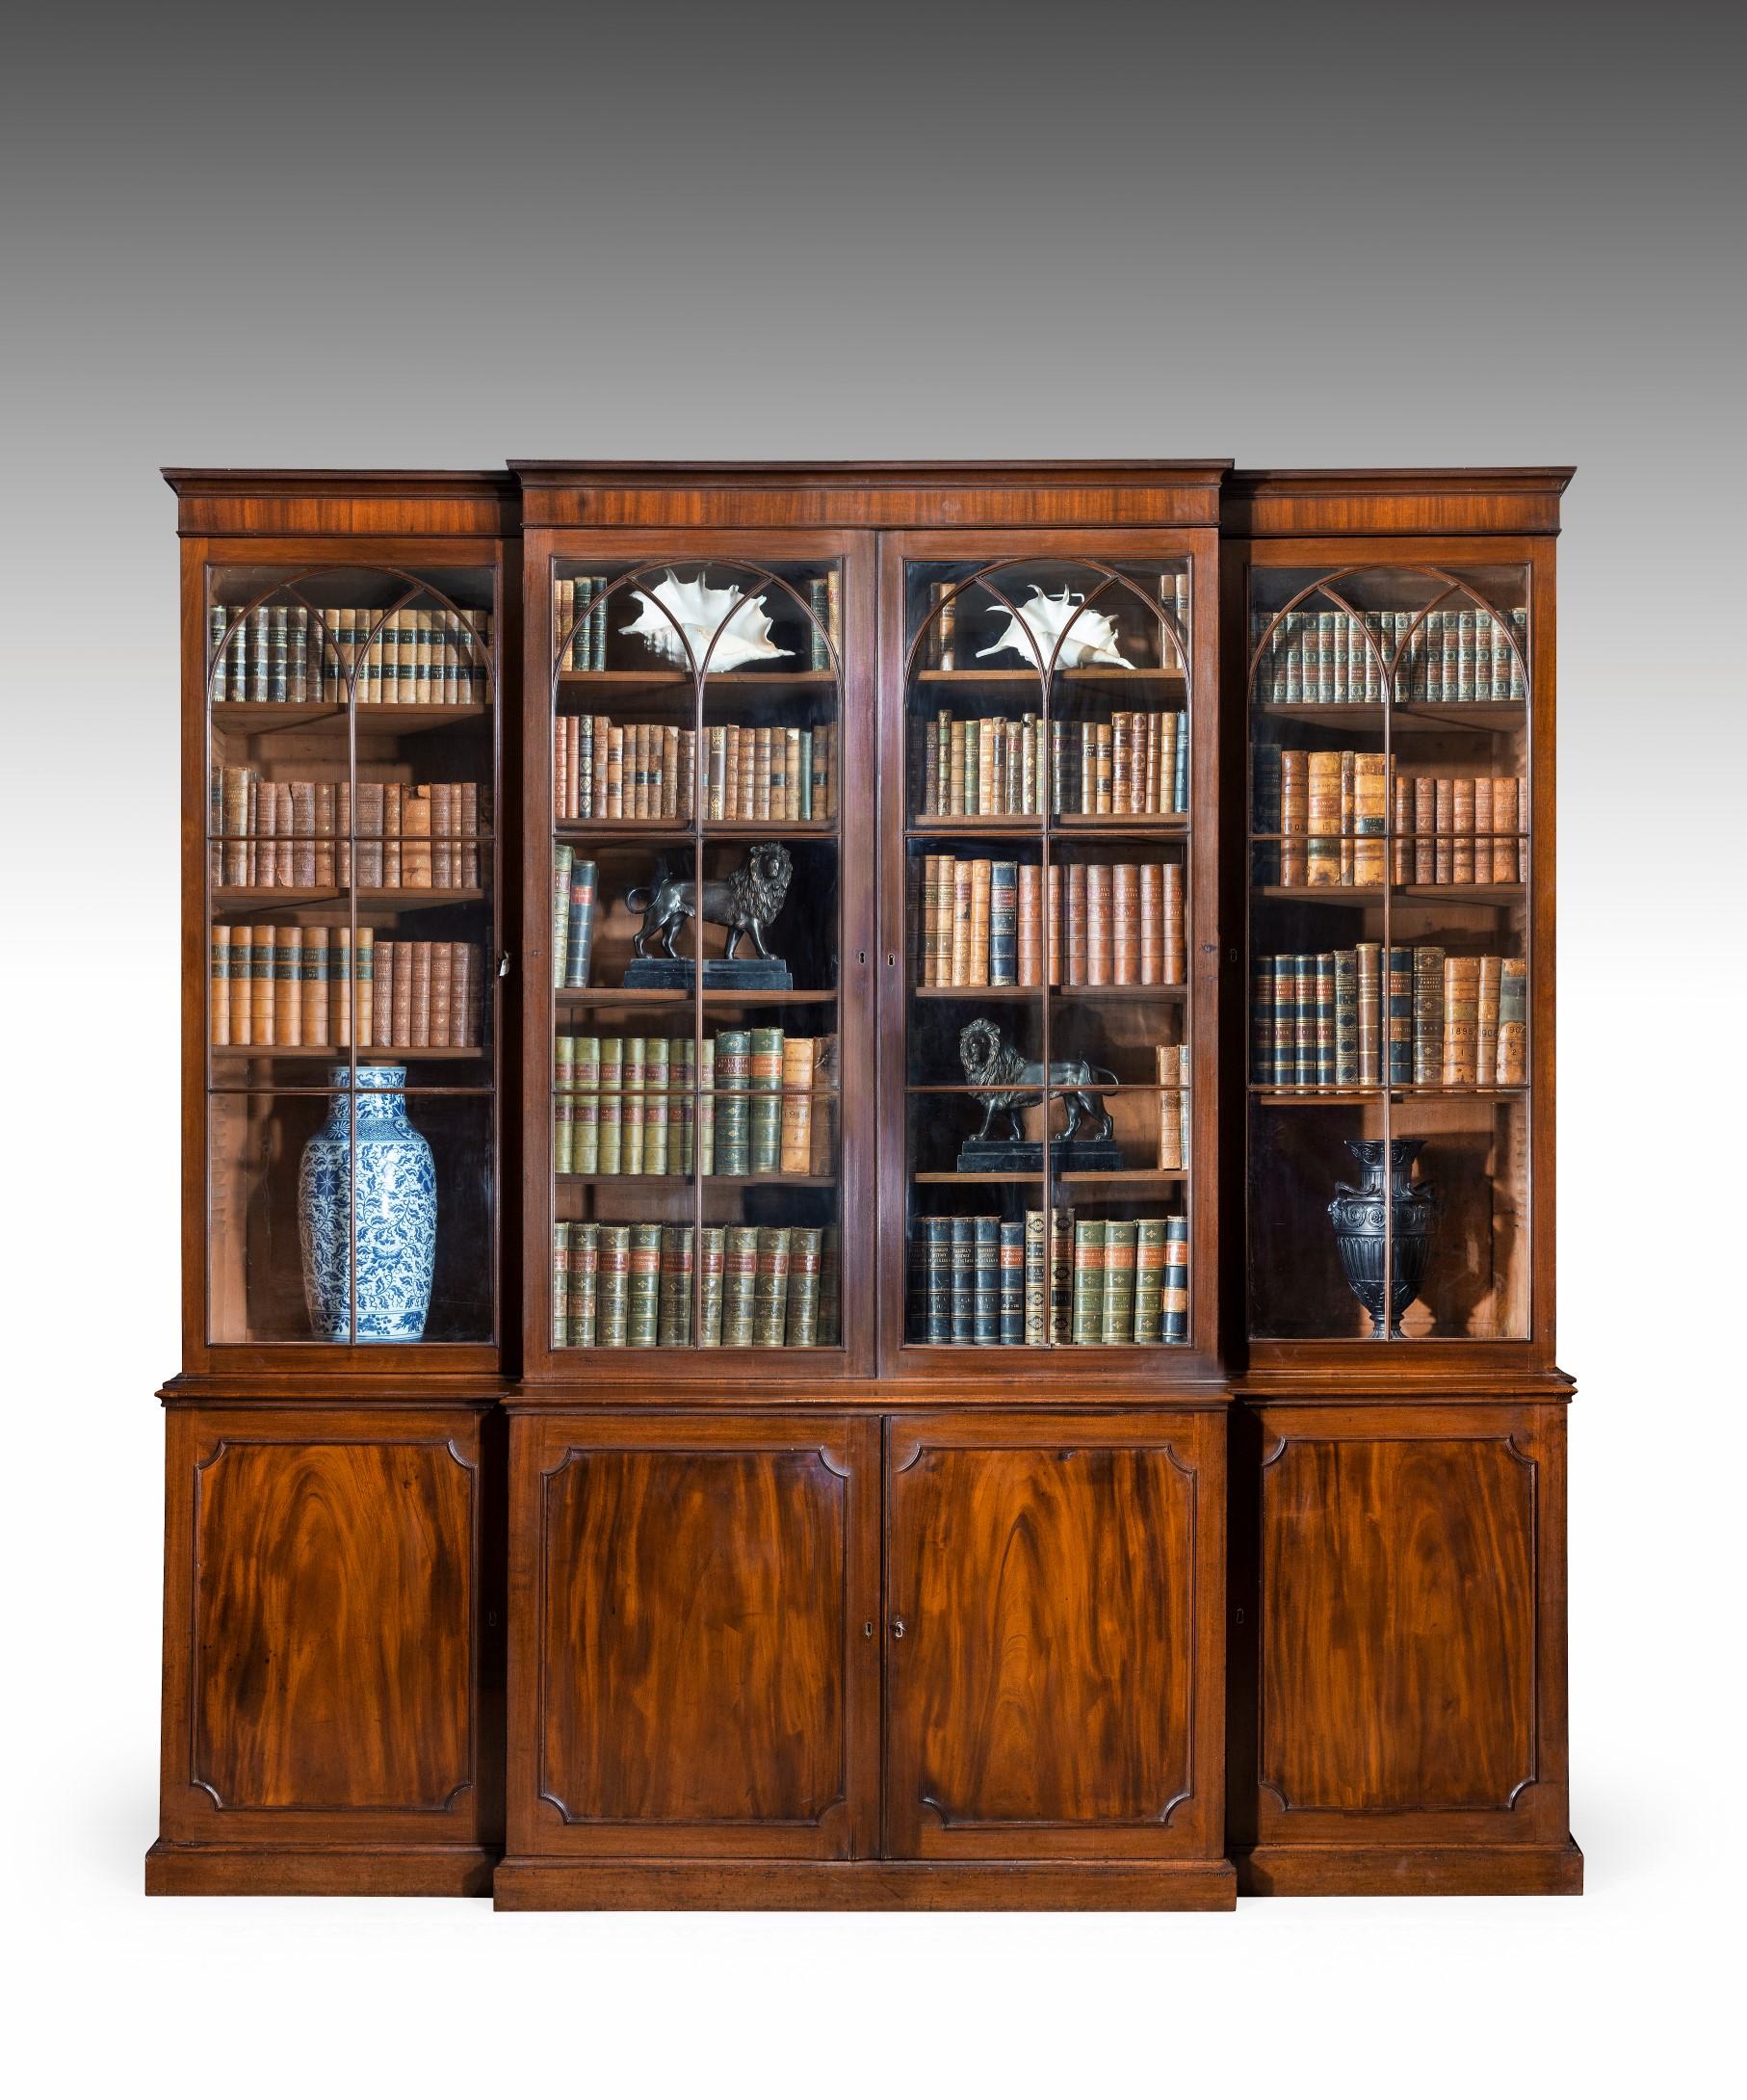 A George III Sheraton period mahogany breakfront bookcase; the cavetto moulded and crossgrain veneered cornice above glazed doors with elegant arched astragals that open to reveal fully adjustable shelves; below are panelled cupboard doors which